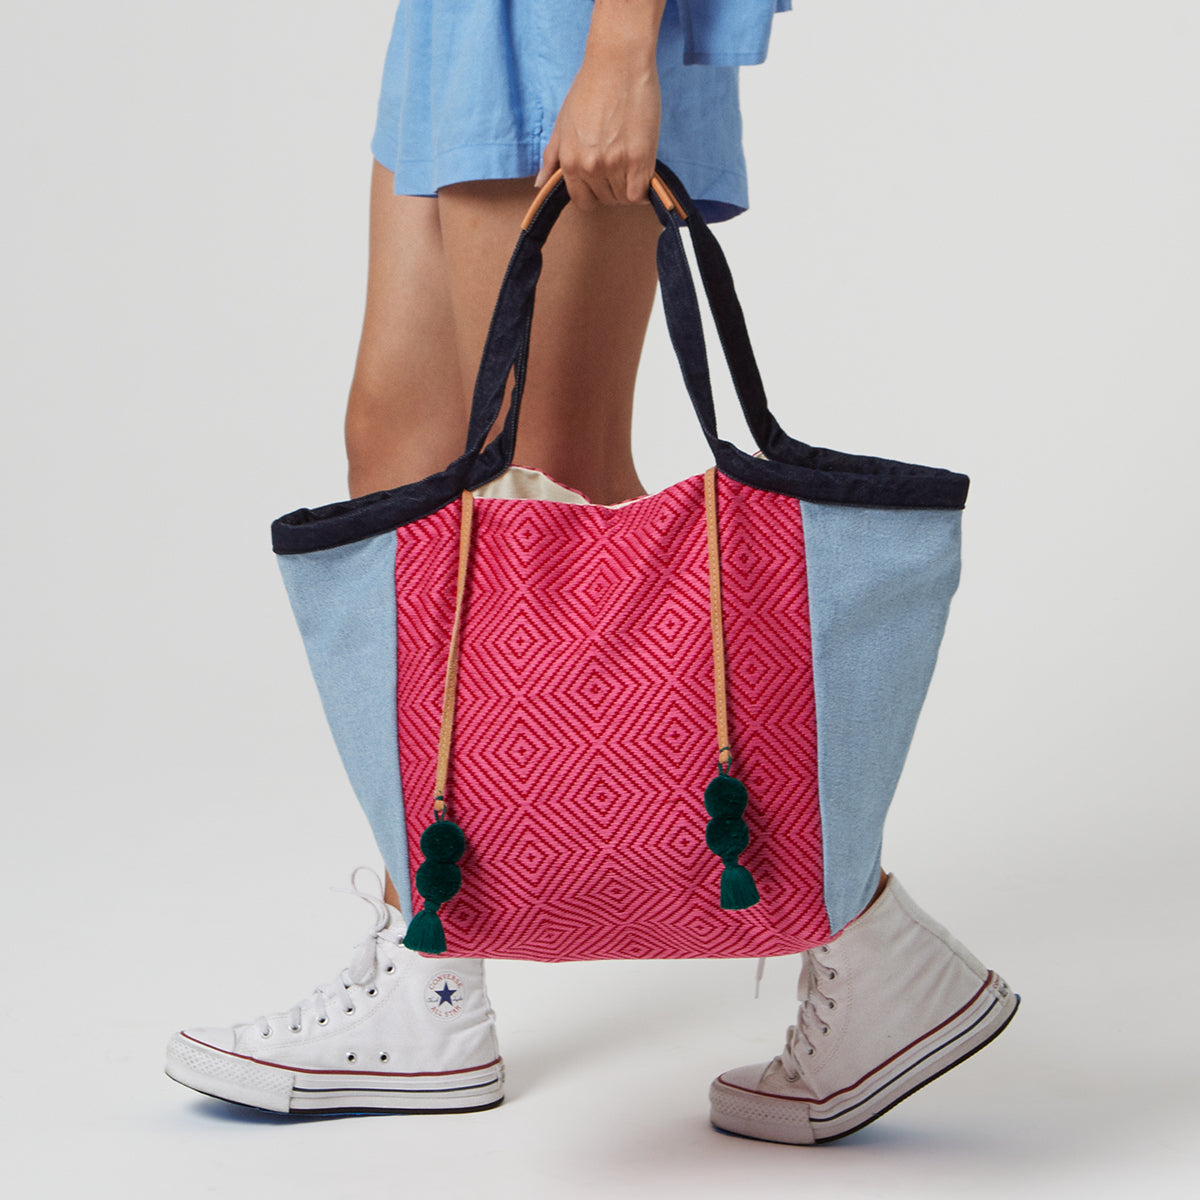 A model holds the hand woven artisan Rosa Tote in Raspberry pattern.